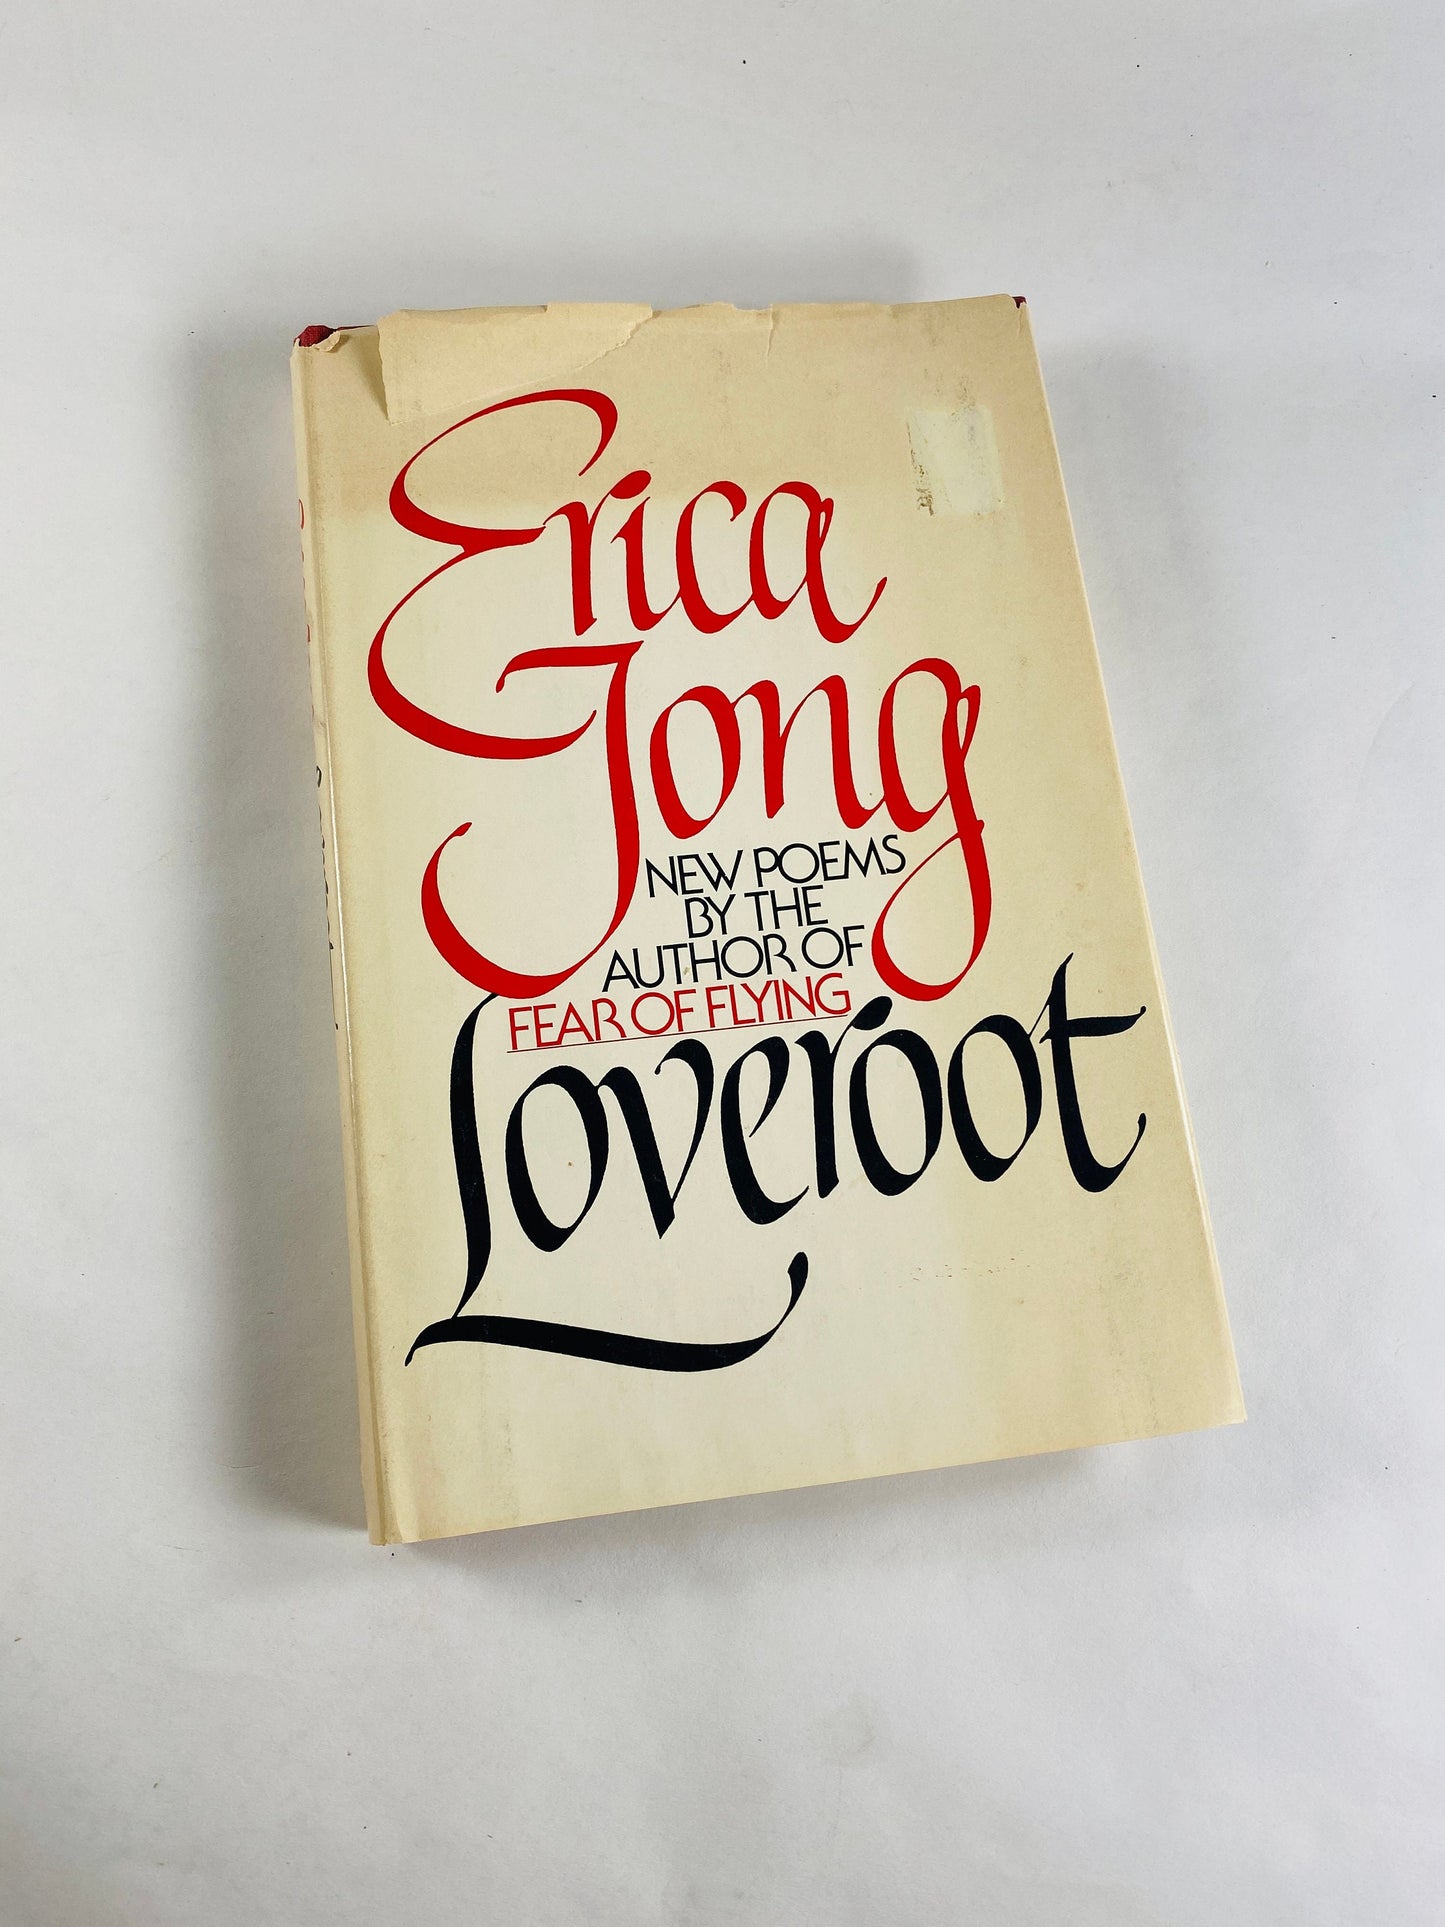 Loveroot vintage book by Erica Jong author of Fear of Flying circa 1975 Controversial feminism and sexuality. Book gift